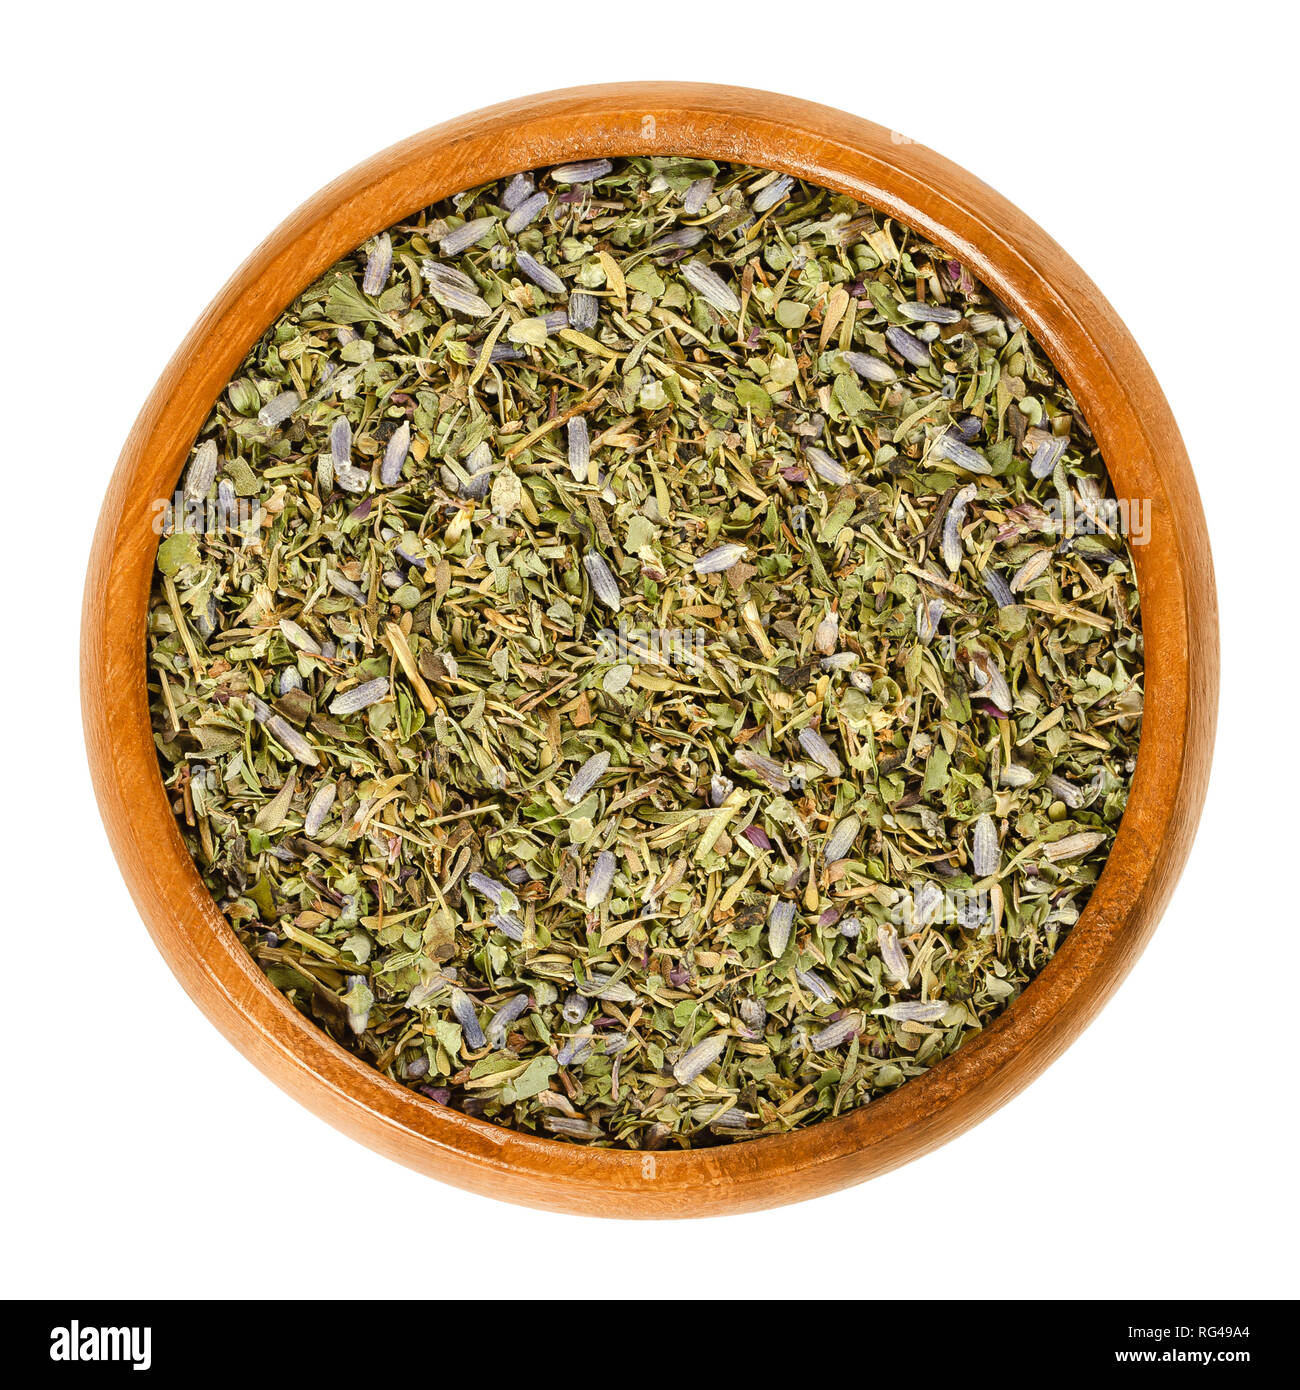 Herbes de Provence in wooden bowl. Mixture of dried herbs of the Provence, France. Savory, rosemary, thyme, lavender, oregano and marjoram. Stock Photo